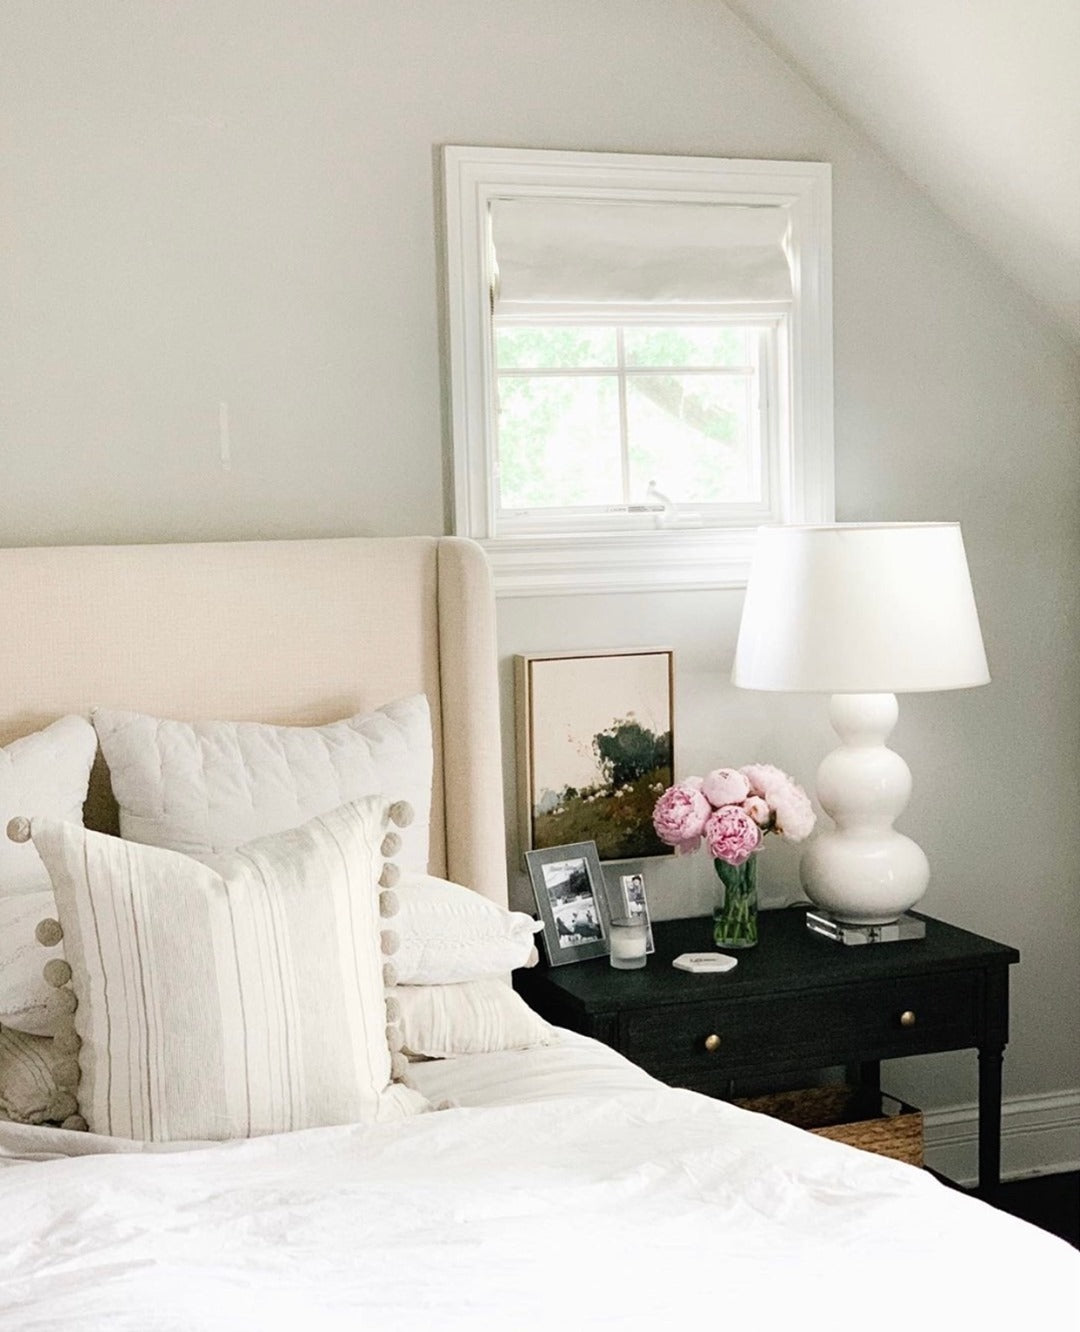 Elegant bedroom with beige sofa bed, plush pillows, black nightstand with white lamp and pink peonies, promoting a serene and stylish sleep environment with EaseEase blackout Roman blinds